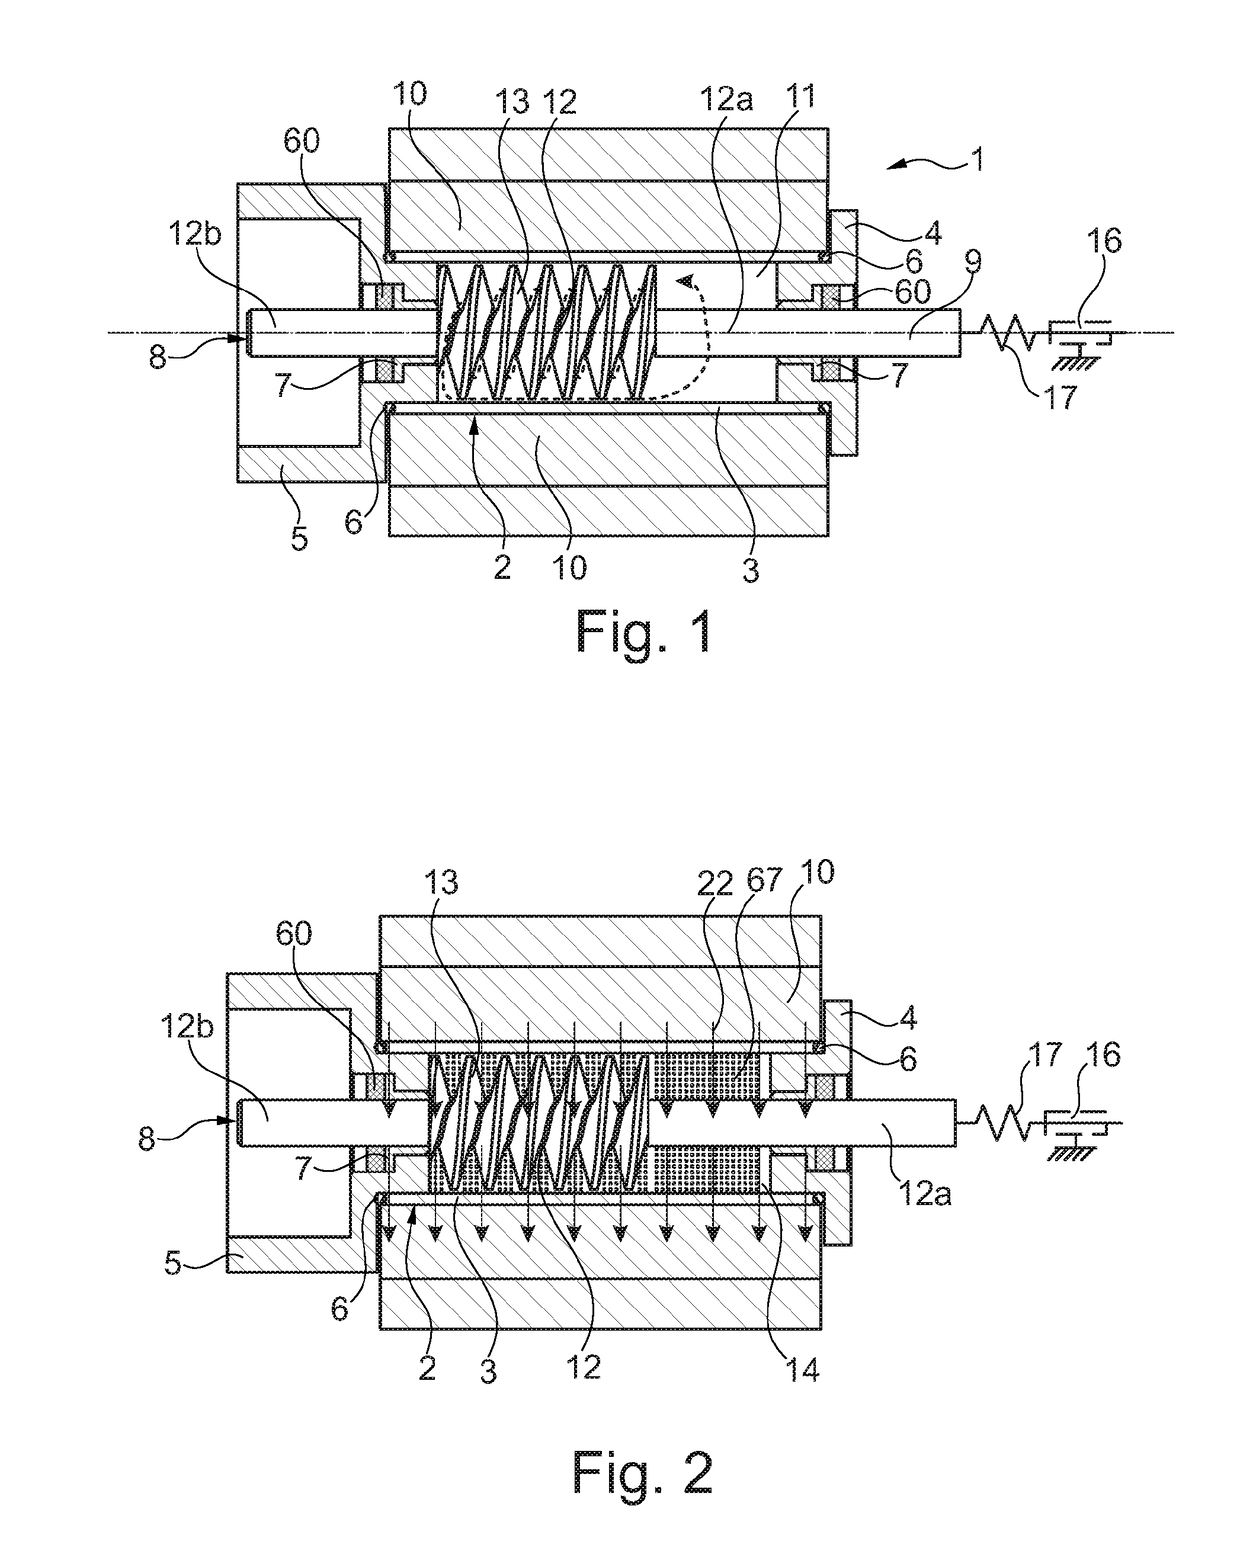 Magnetorheological actuator having a rotationally driven threaded spindle and clutch having an actuator